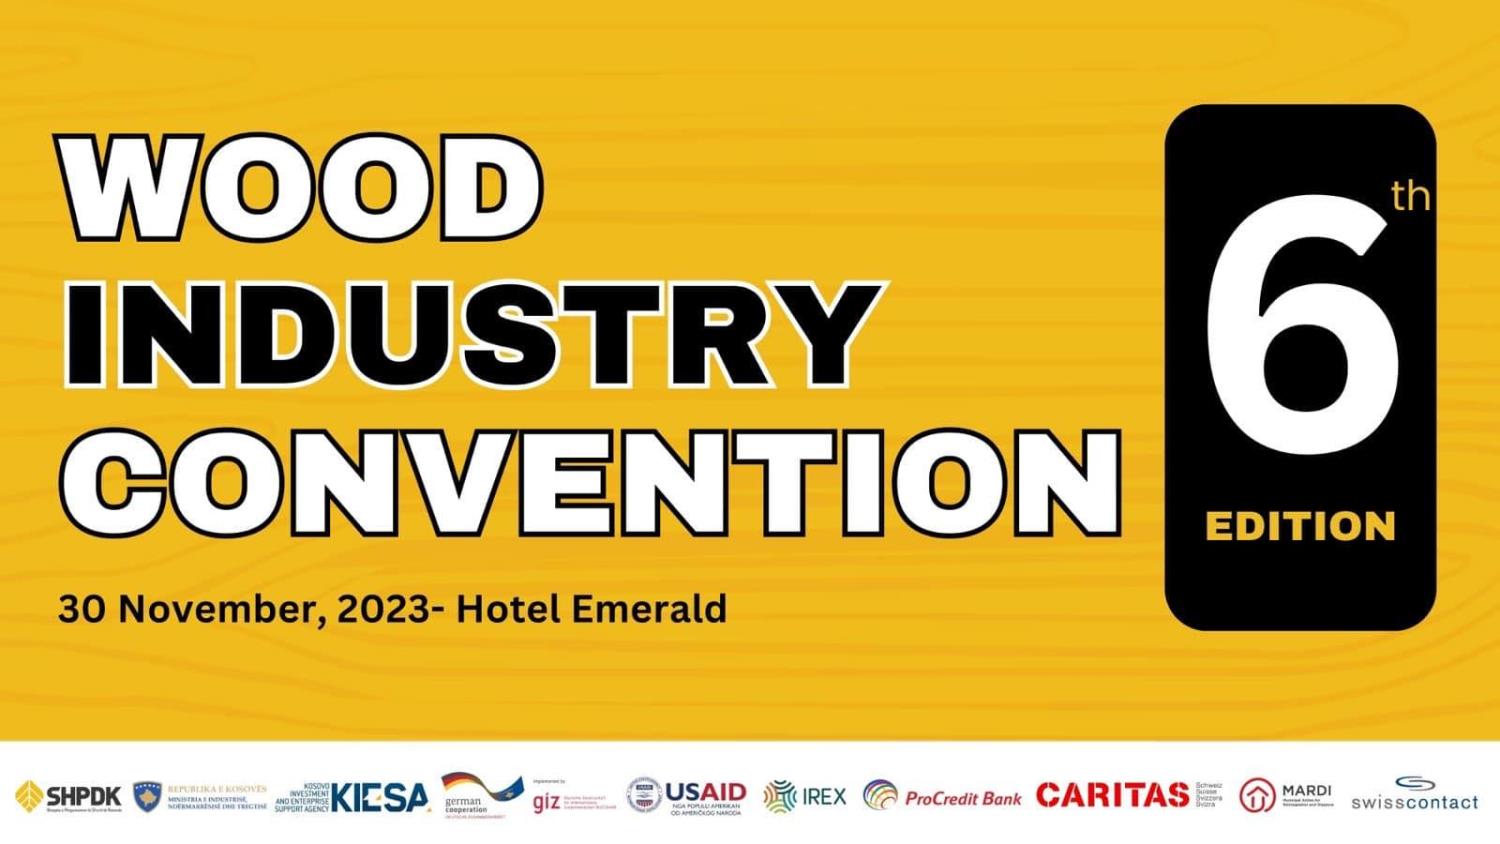 Sixth Wood Industry Convention - National design competition